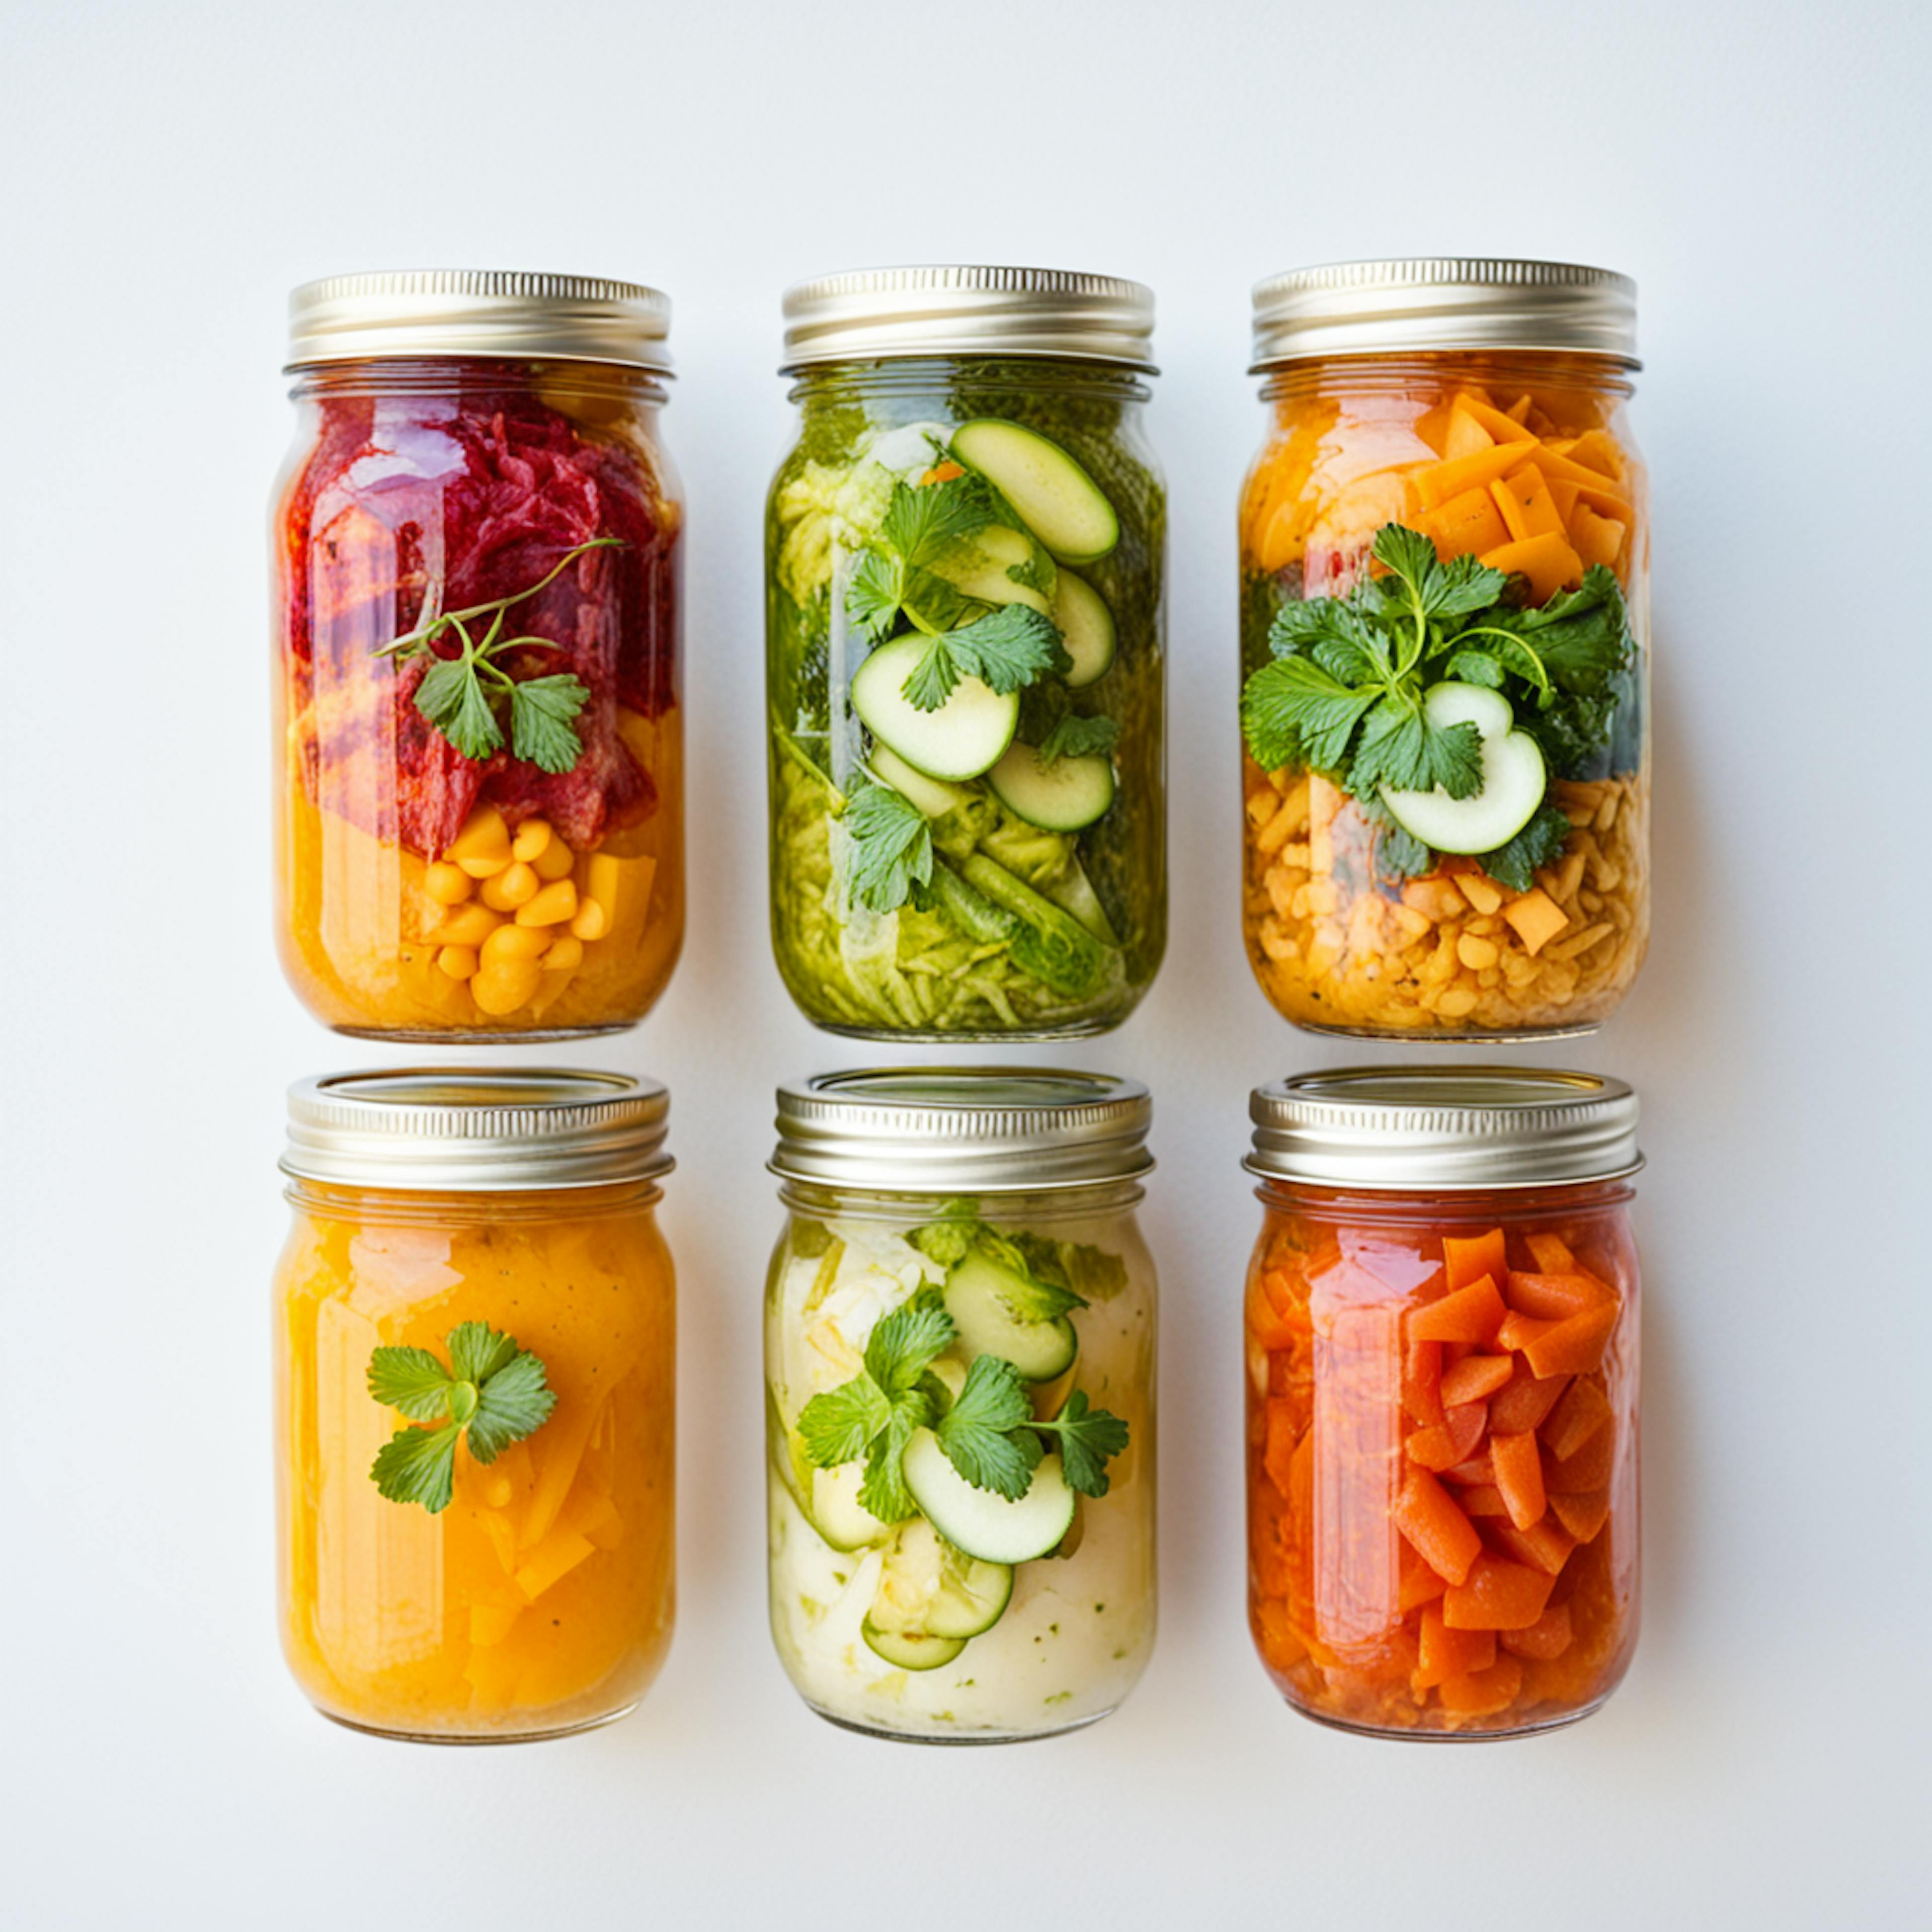 Six neatly arranged glass jars filled with assorted pickled vegetables and garnished with fresh herbs. The bright and colorful presentation on a white background highlights the freshness and variety of the contents. This image is ideal for a health and wellness digital marketing strategy, showcasing healthy and delicious food options.